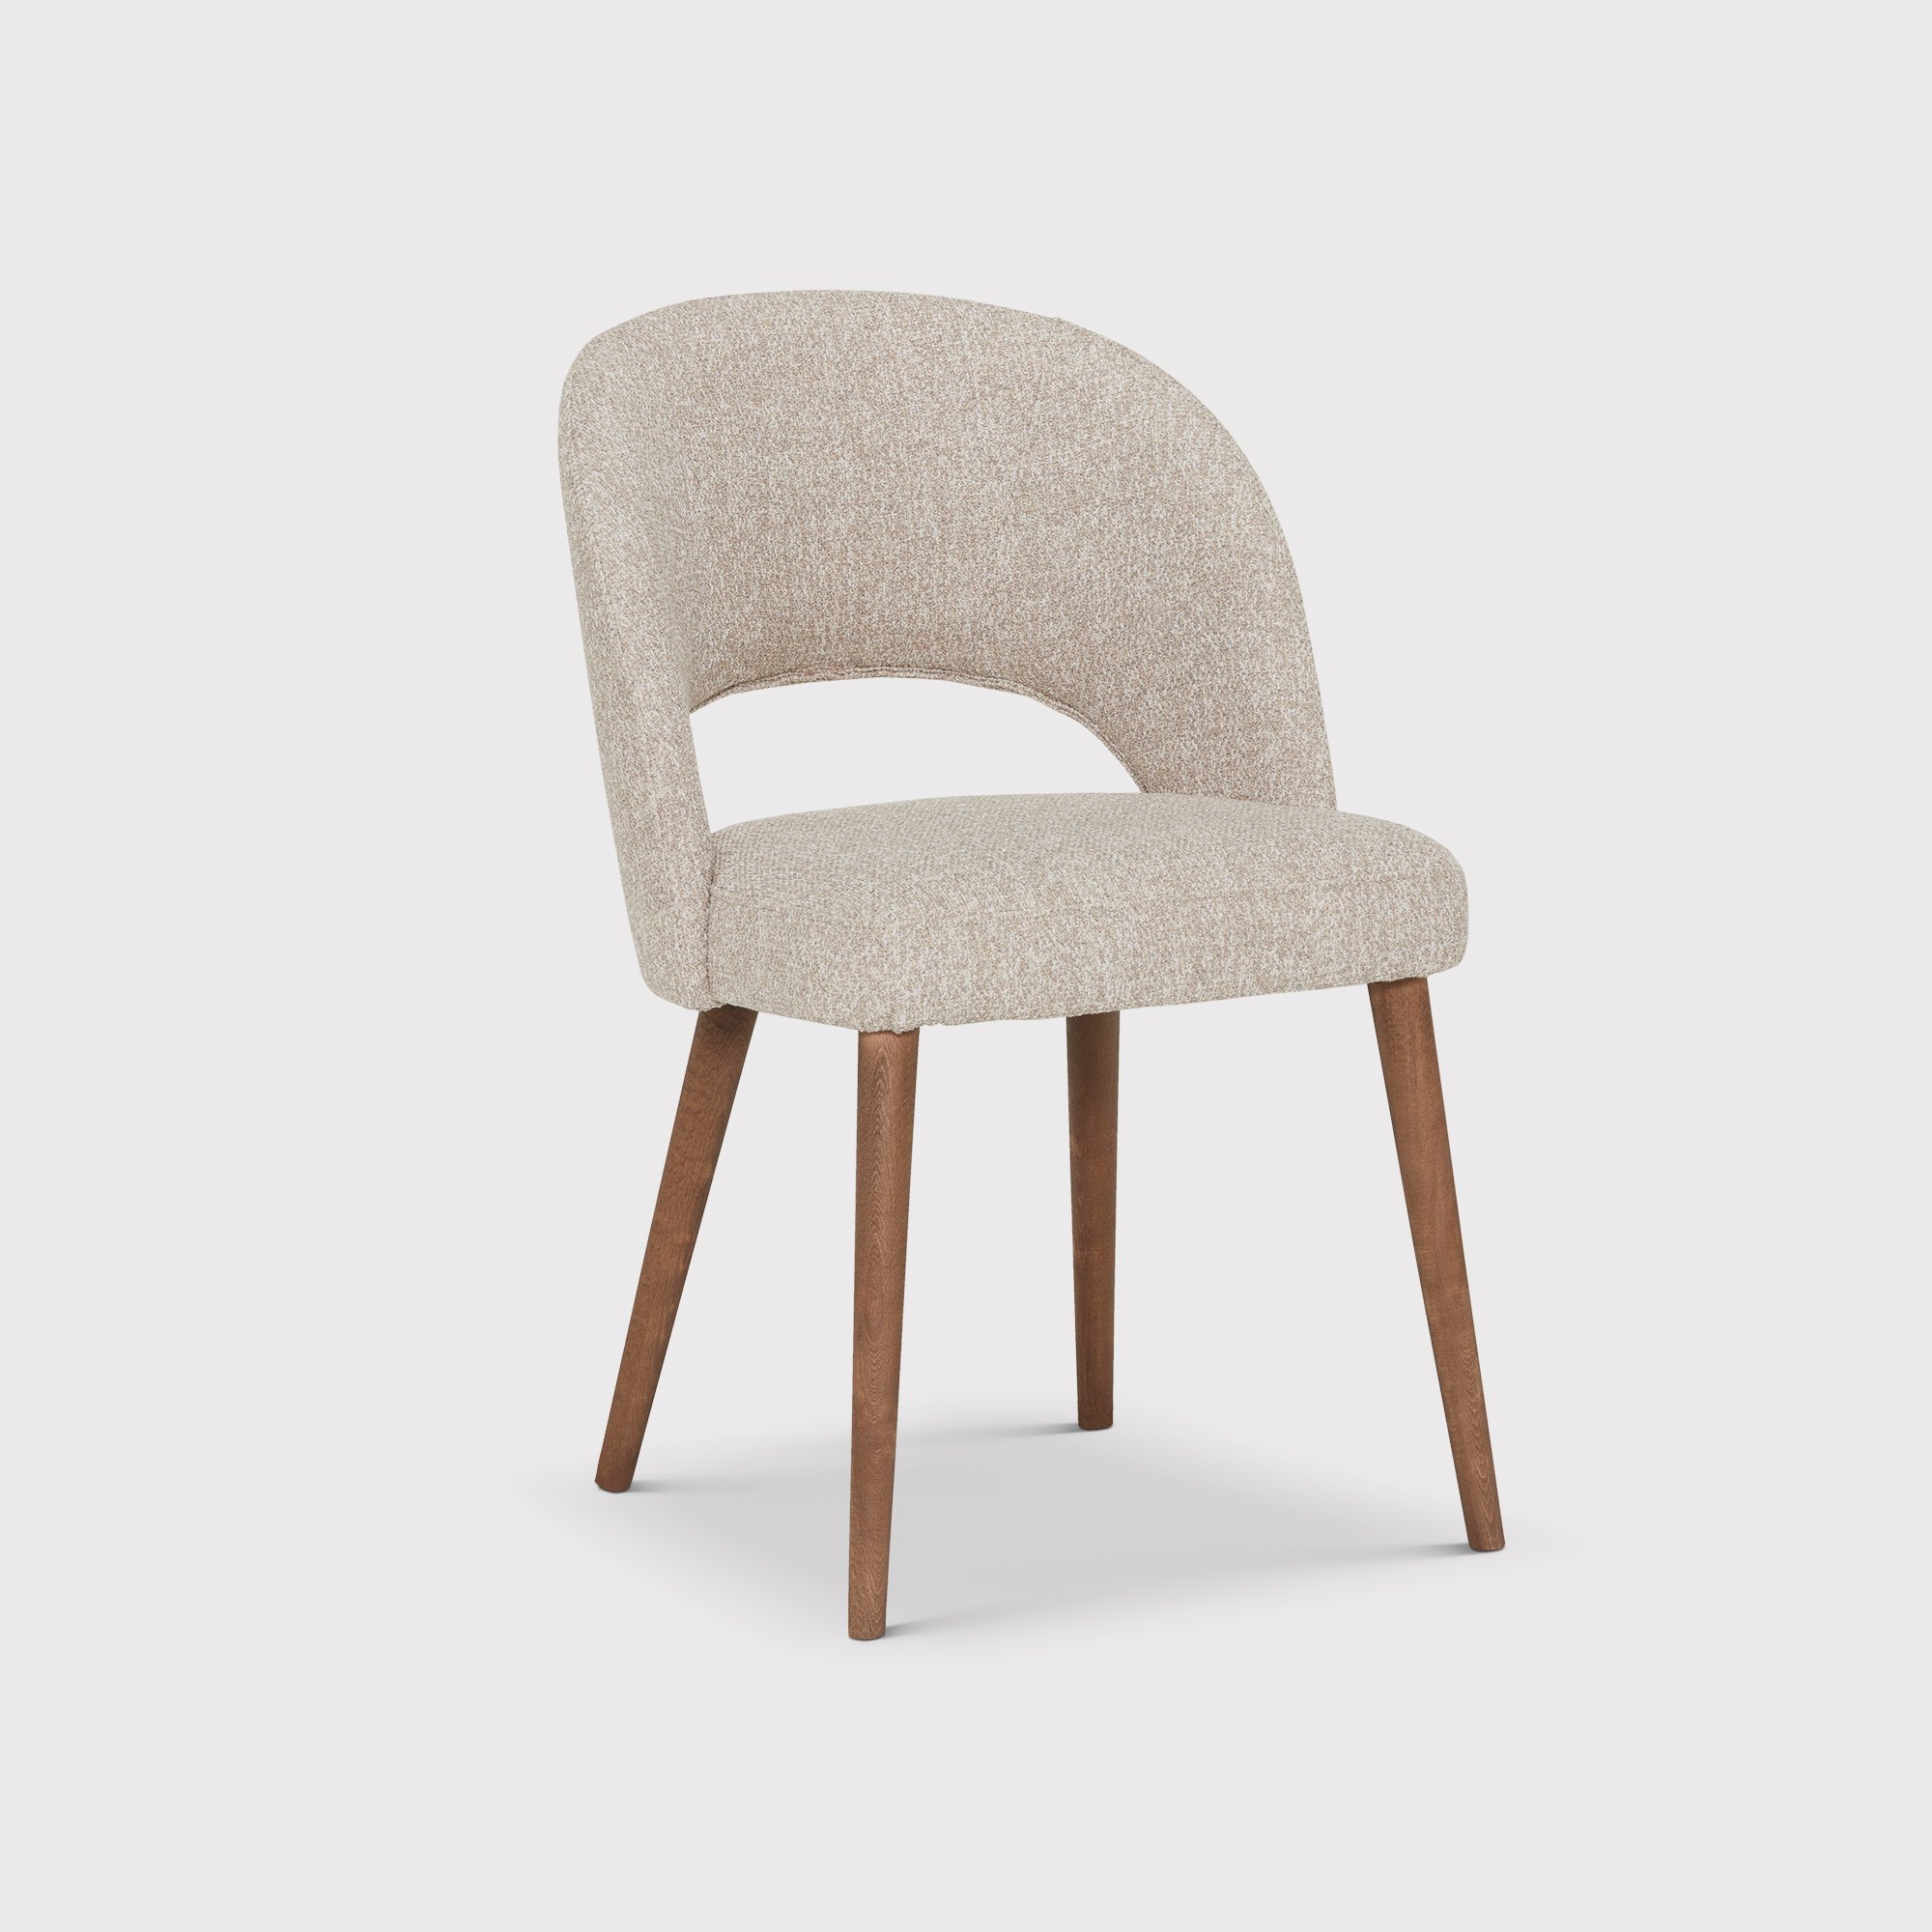 Photo of Pure furniture beck dining chair